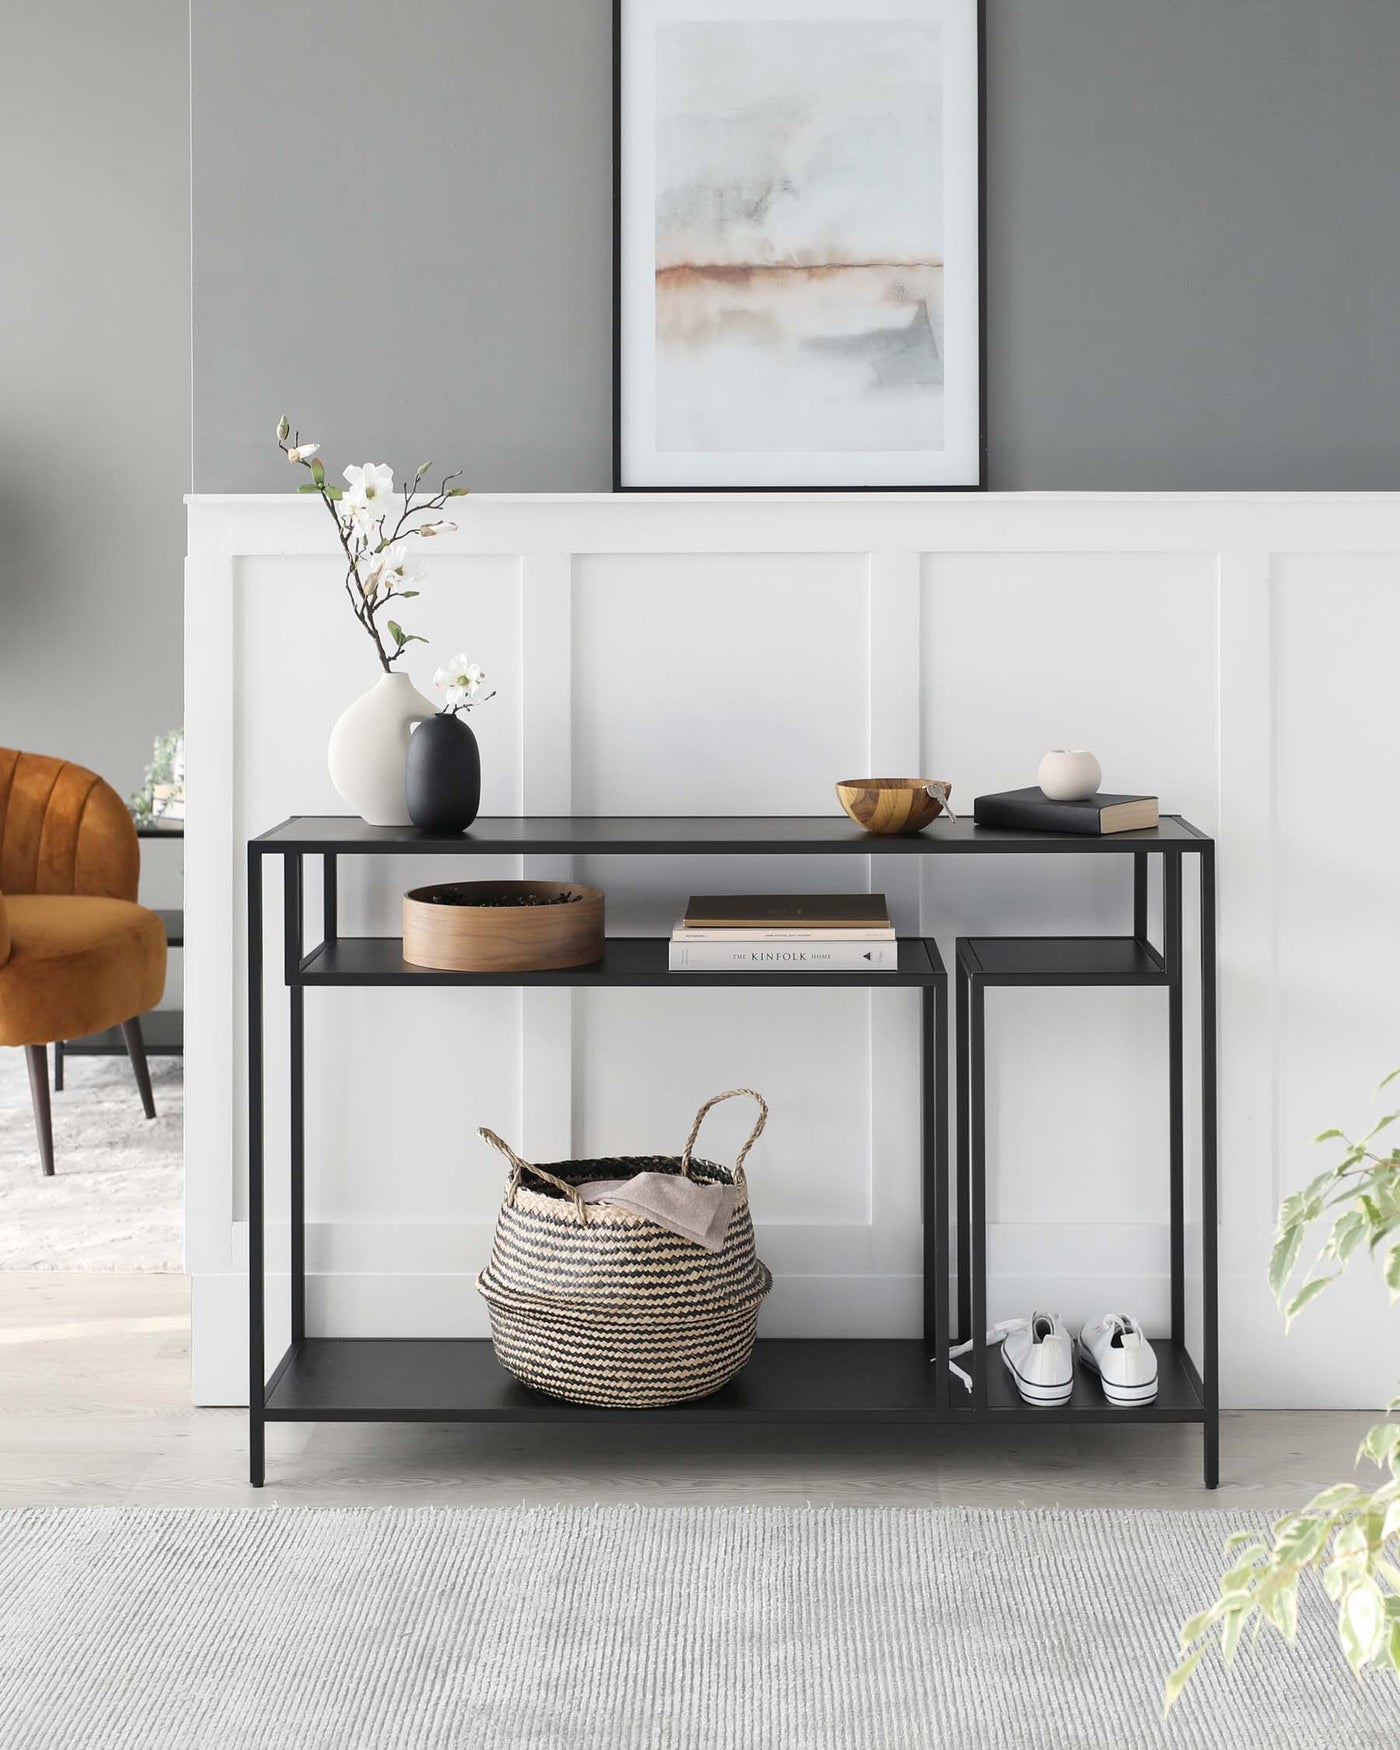 Modern two-tier console table with a matte black metal frame and sleek straight lines. The top tier displays a ceramic vase with white flowers, decorative bowls, and books. Below, a woven basket and white sneakers rest on the lower shelf. The table adds a functional yet stylish element to a contemporary interior with its minimalist design.